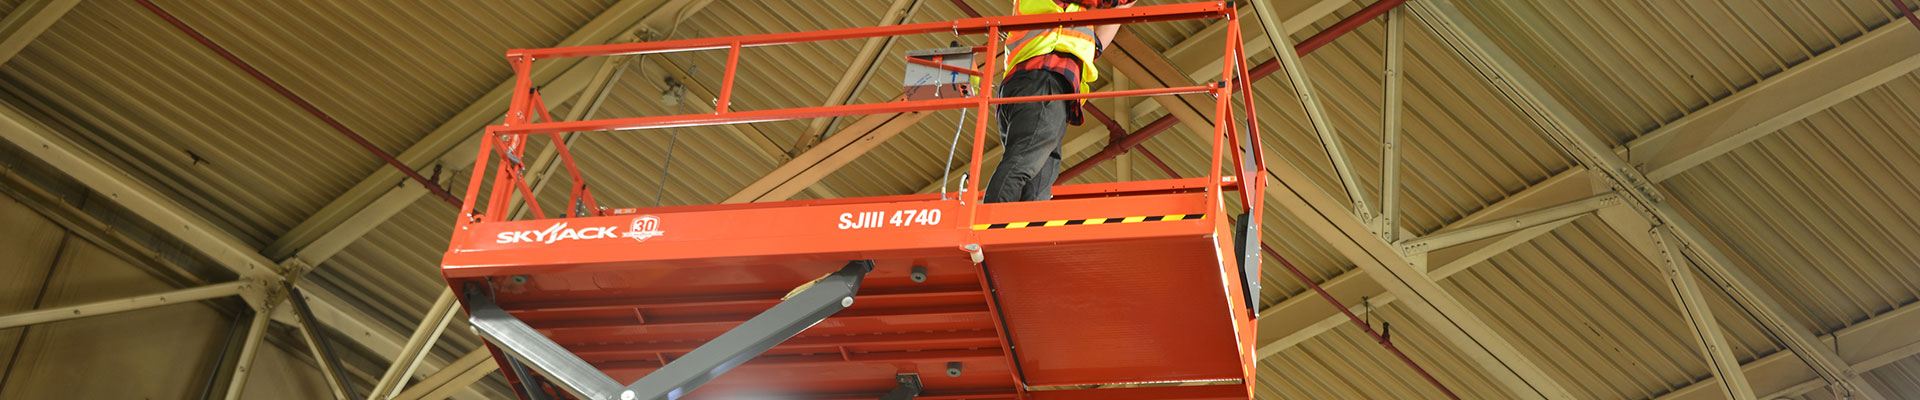 Parts for a Skyjack scissor lift working construction